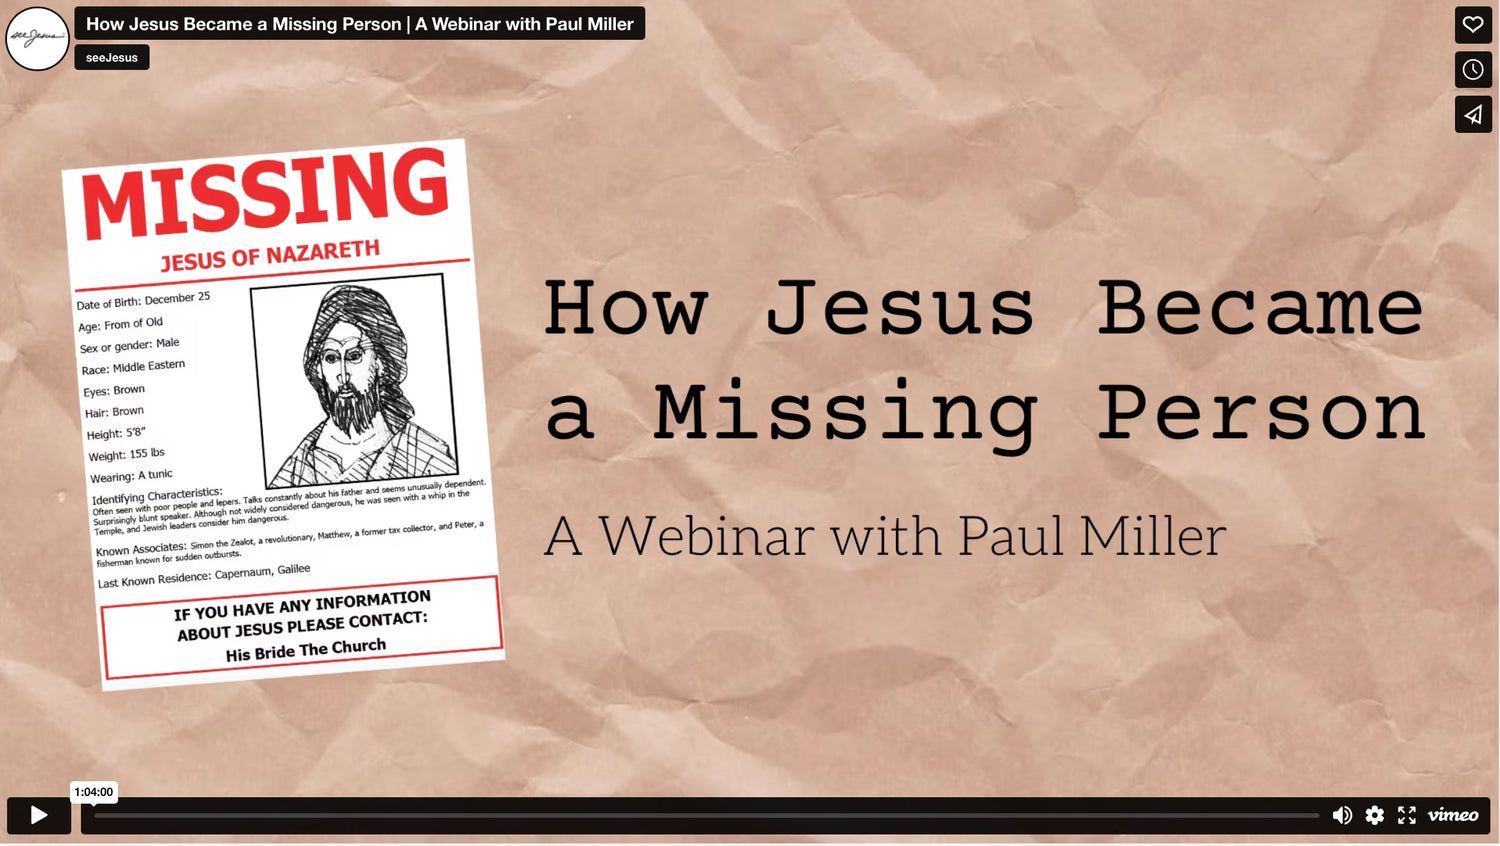 How Jesus Became a Missing Person